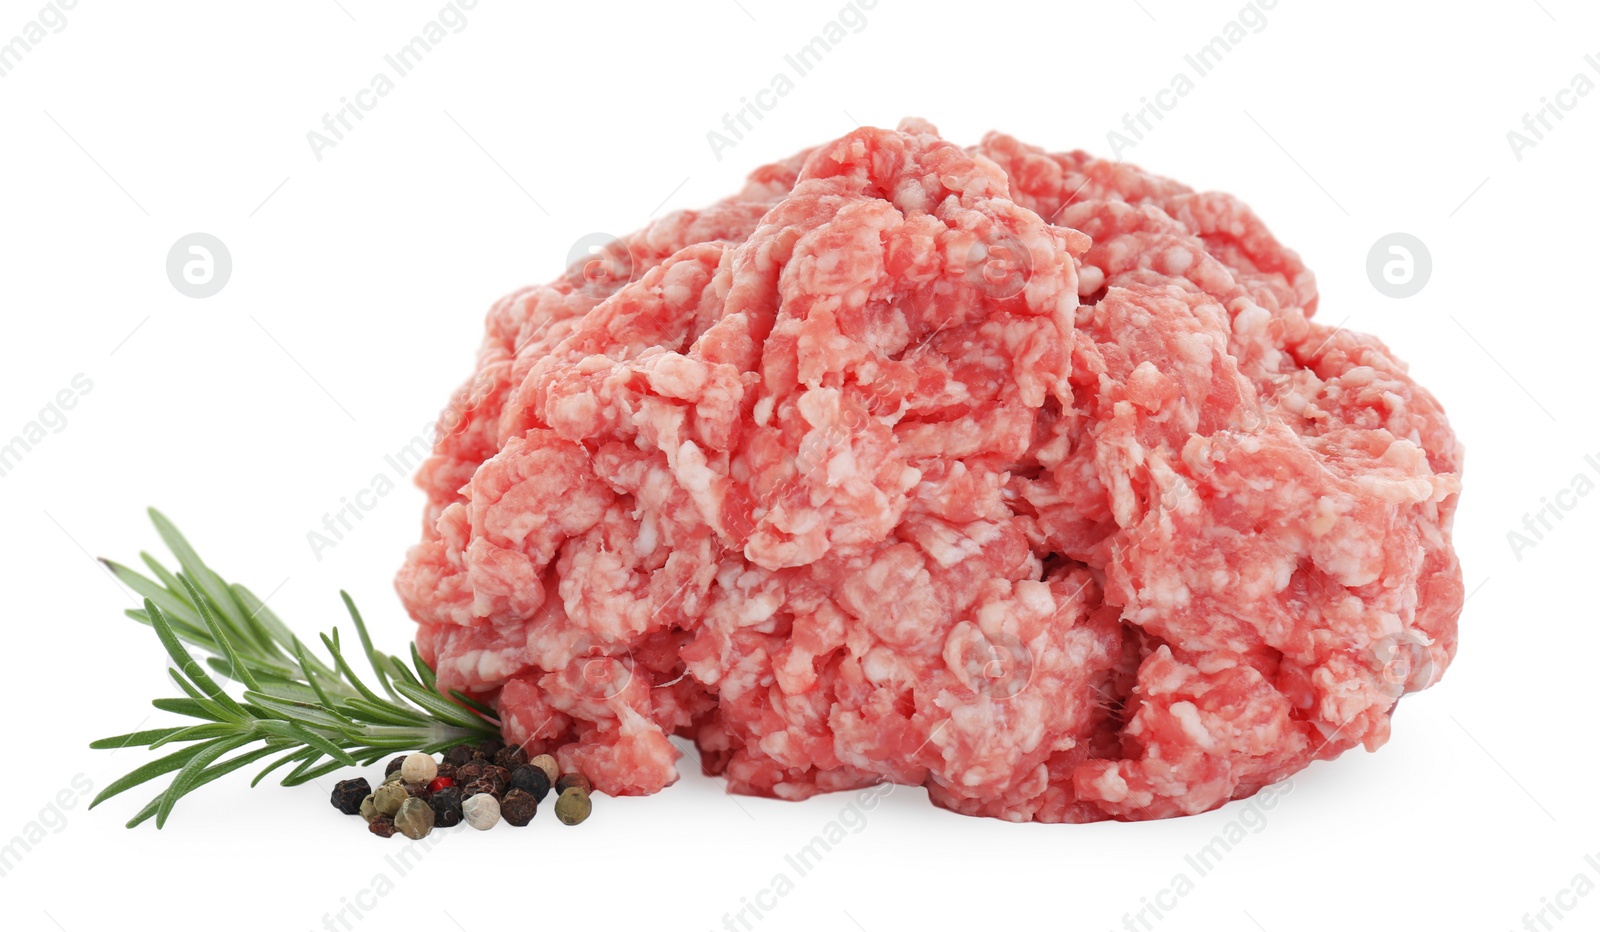 Photo of Raw fresh minced meat with rosemary and pepper isolated on white